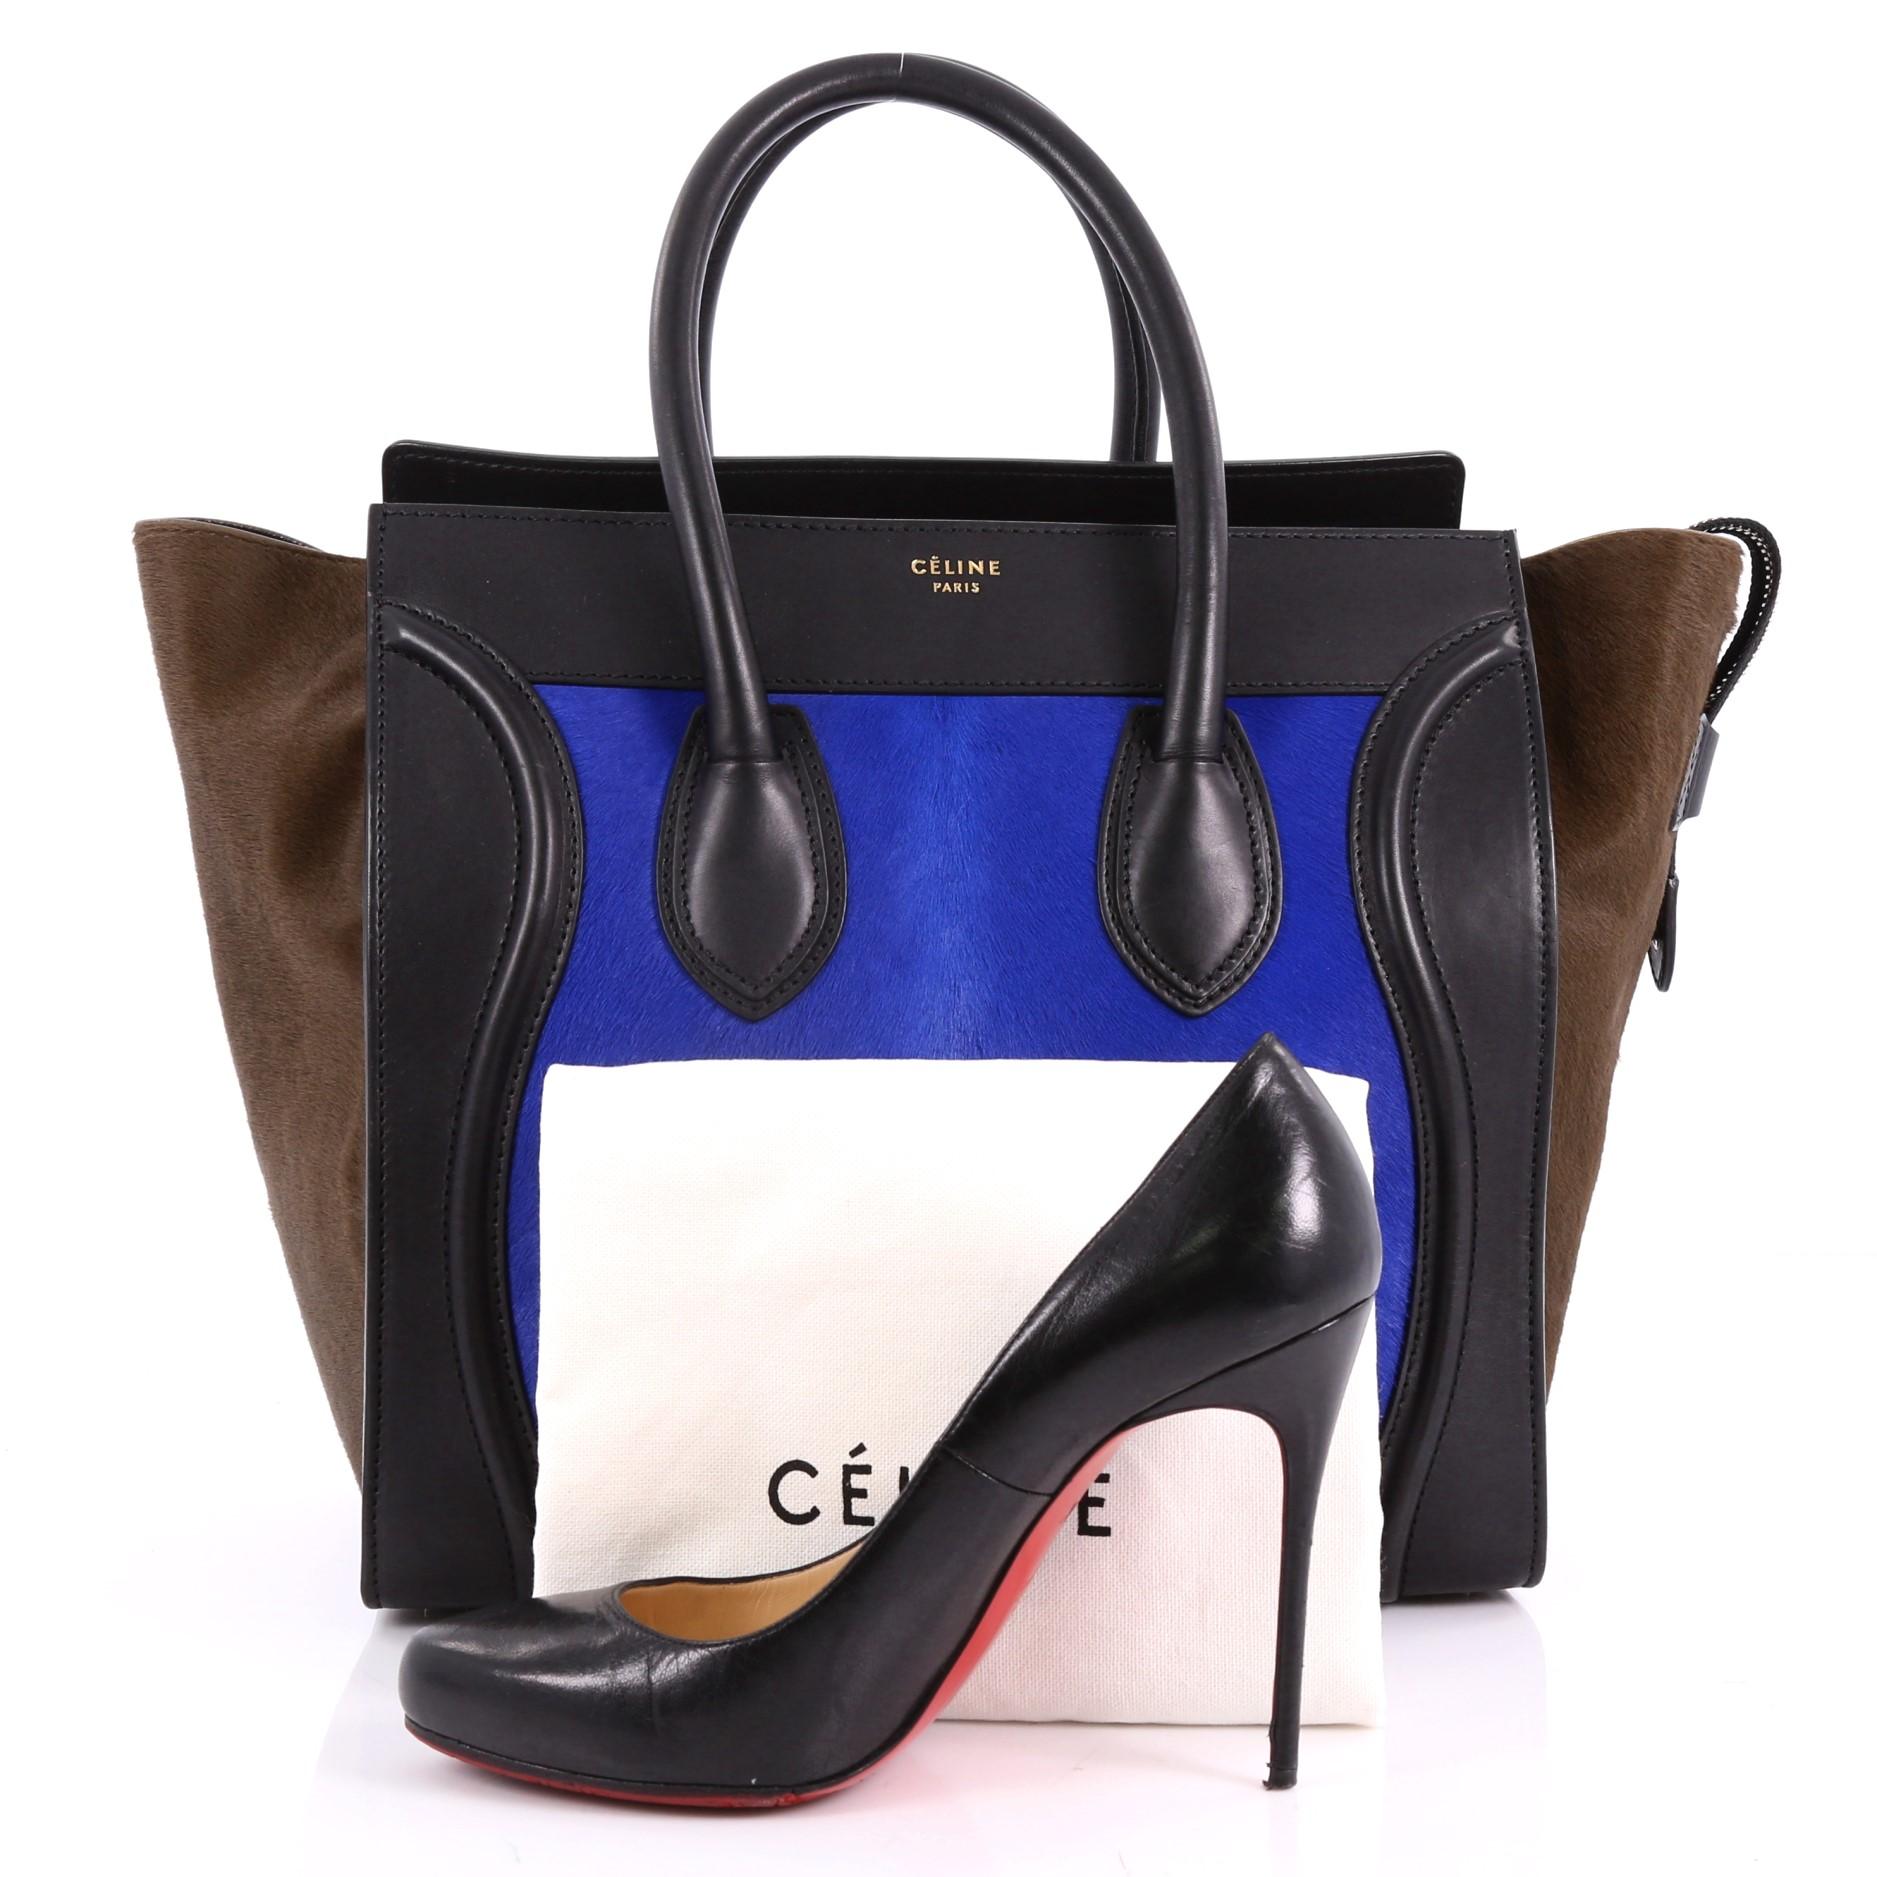 This authentic Celine Tricolor Luggage Handbag Pony Hair and Leather Mini is one of the most sought-after bags beloved by fashionistas. Crafted from genuine tricolor brown and blue pony hair with black leather, this minimalist tote features